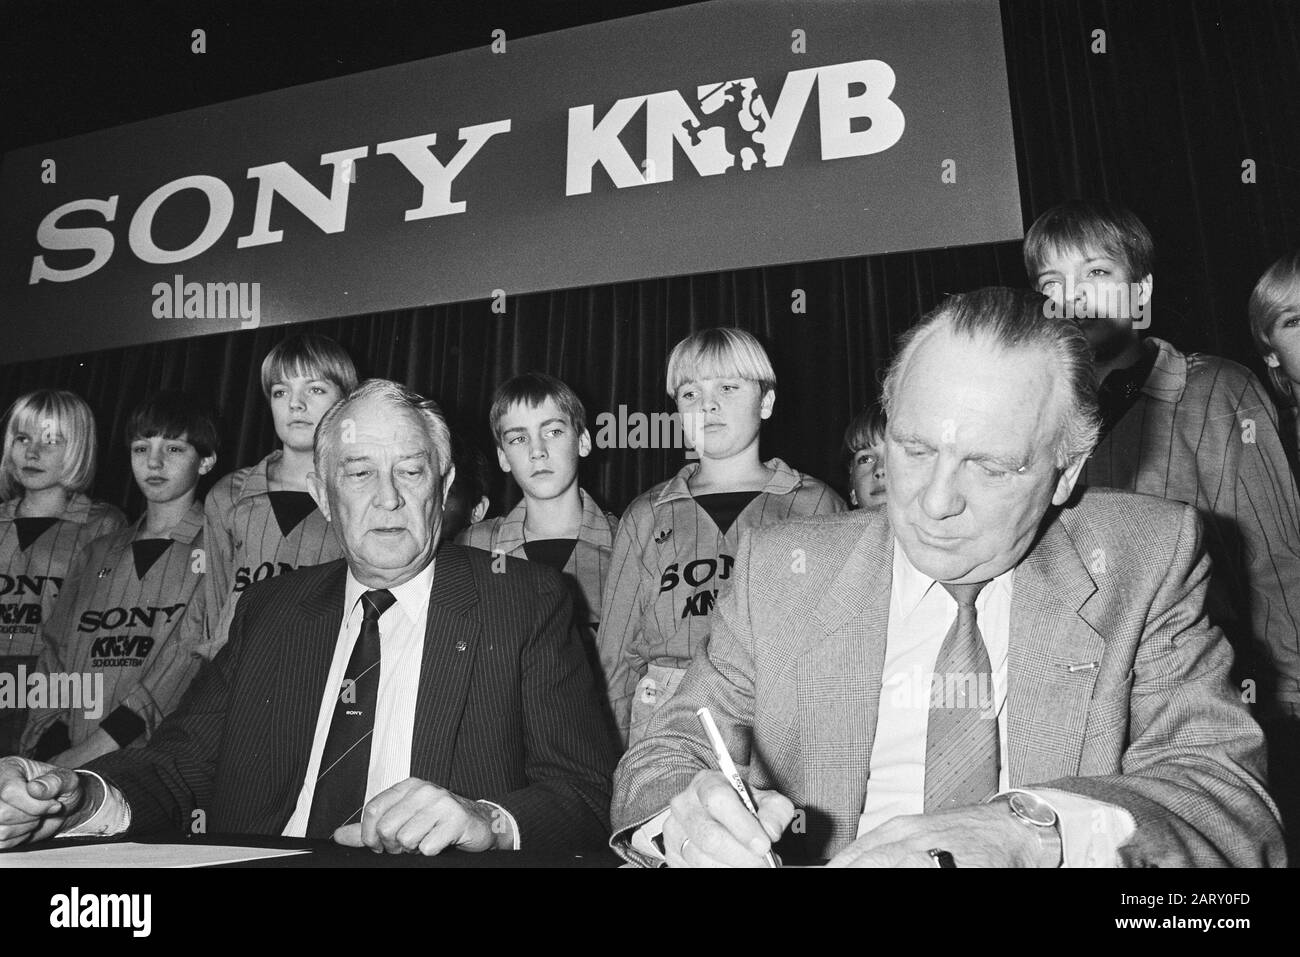 Sponsorcontract signed Sony-KNVB  Chairman of the KNVB Van Marle (r) and Mr. A. (Ton) Brandsteder of Sony signs in the presence of youth Date: November 14, 1983 Keywords: youth, enterprises, agreements, sponsorship, football, chairmen Personal name: Brandsteder, A, Marle, J.W. of Institution Name: Sony Stock Photo